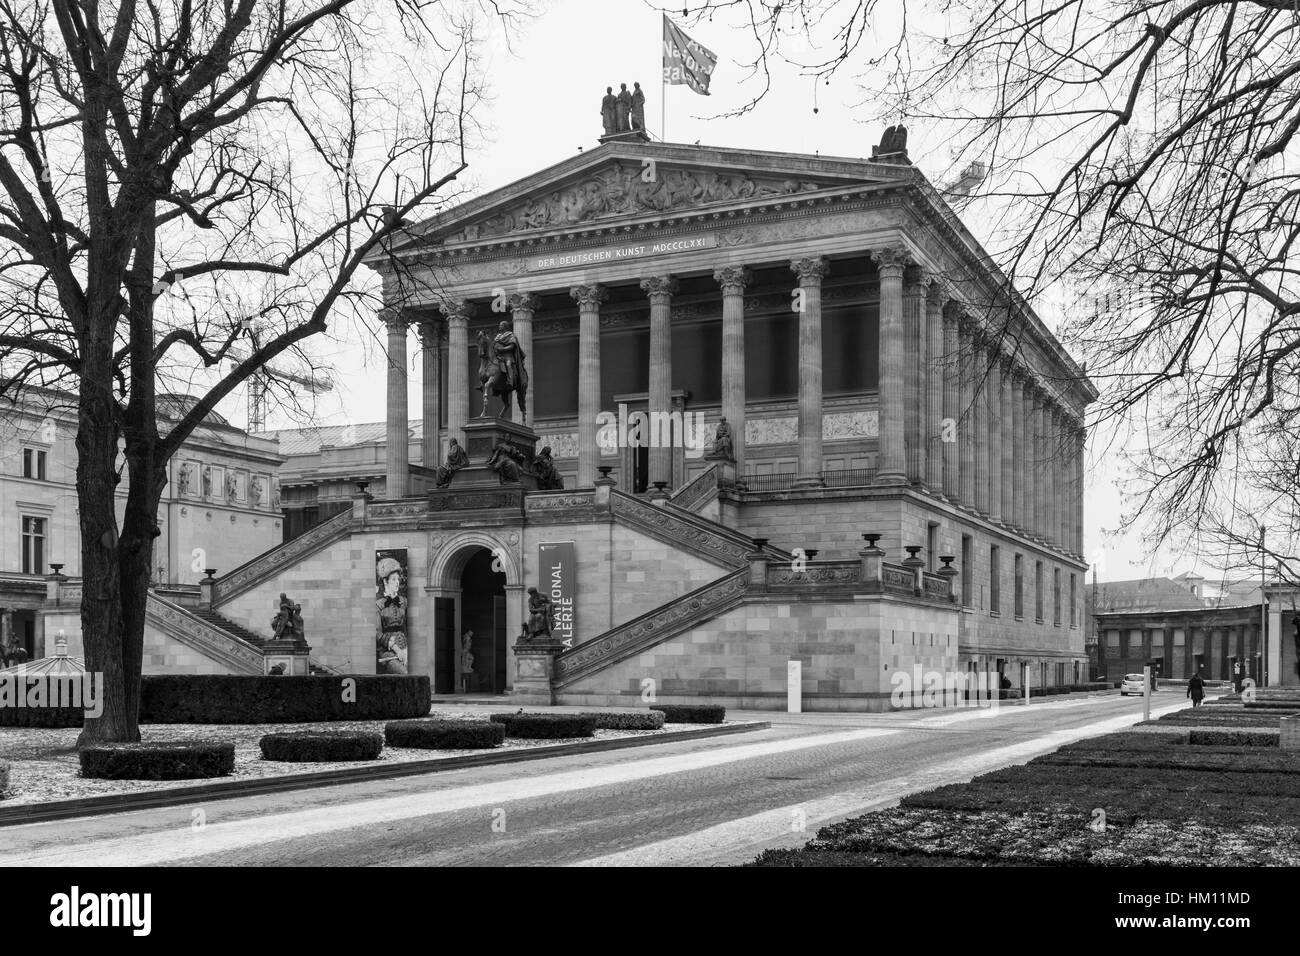 The Alte Nationalgalerie in Berlin, Germany and located on what is known locally as Museum Island, was built in 1861 as an exprseeion of 'the unity of Stock Photo